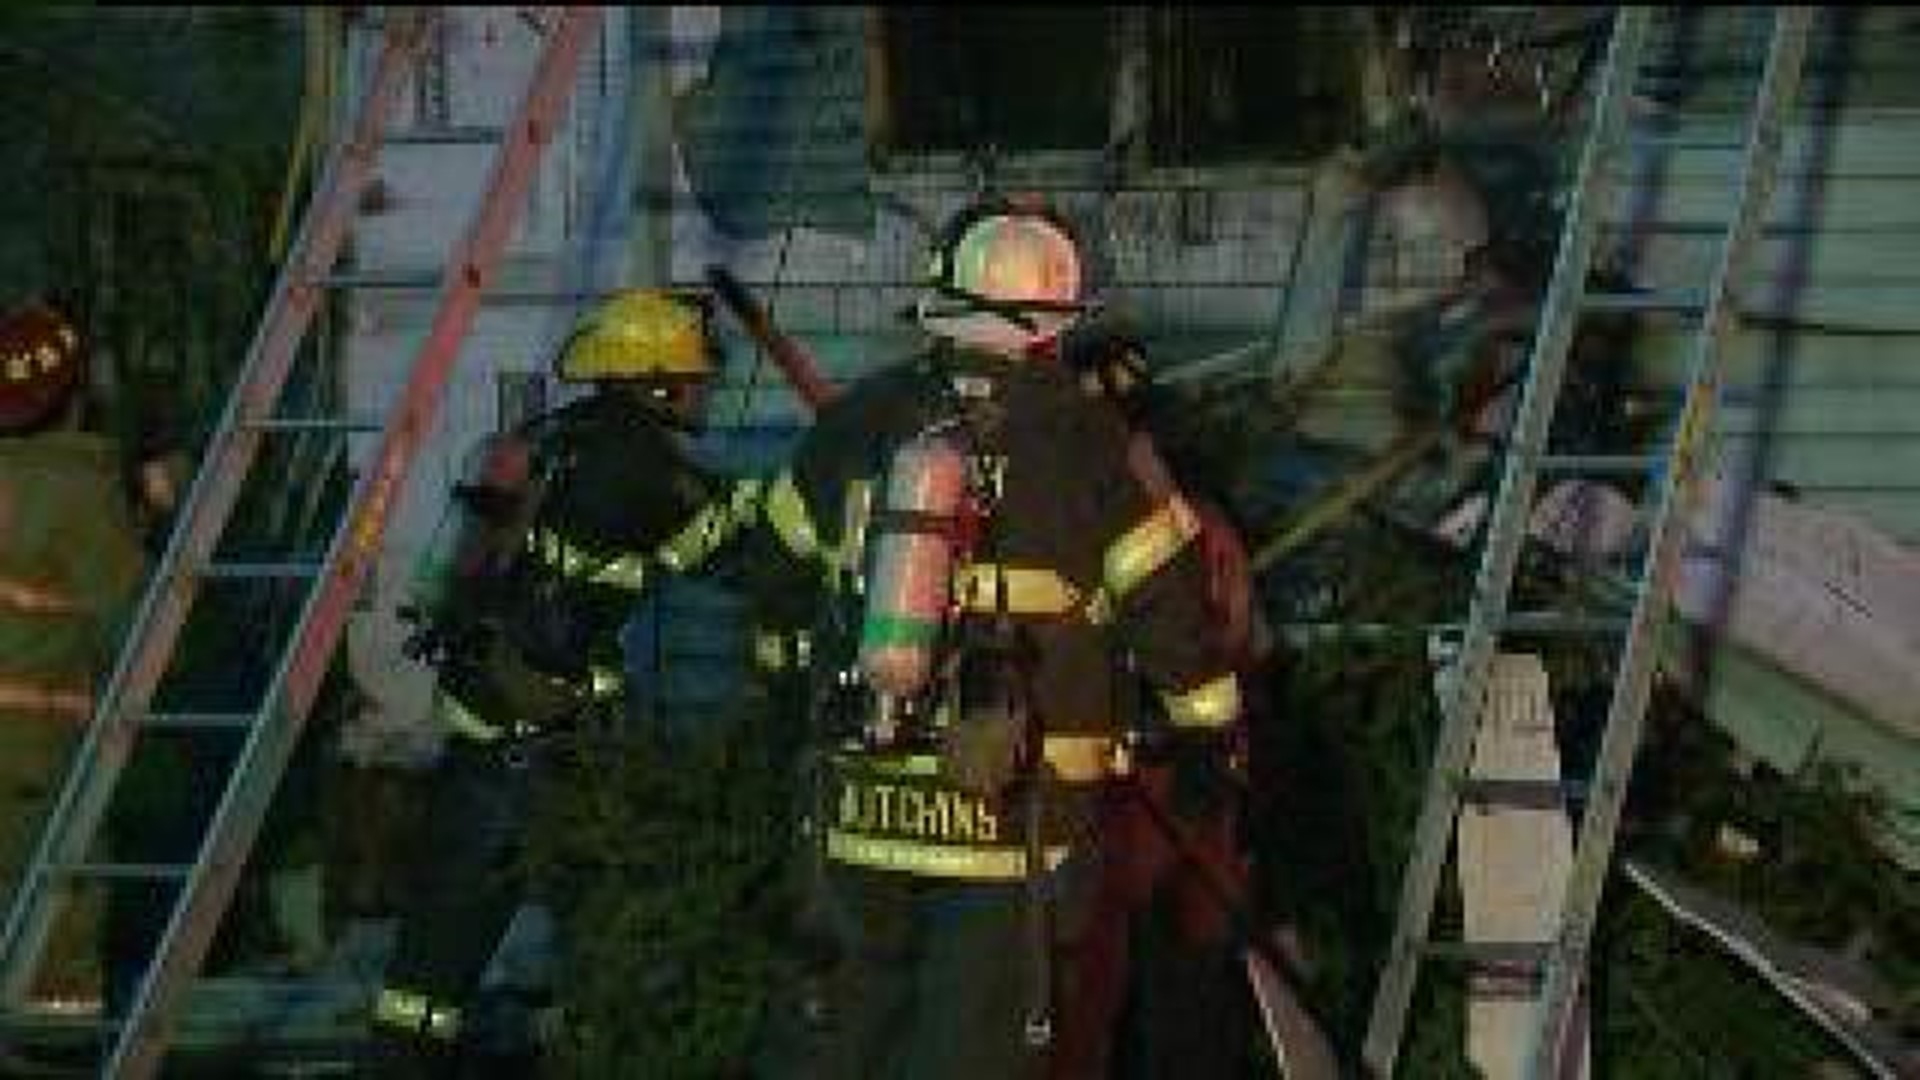 Family of Six displaced after fire